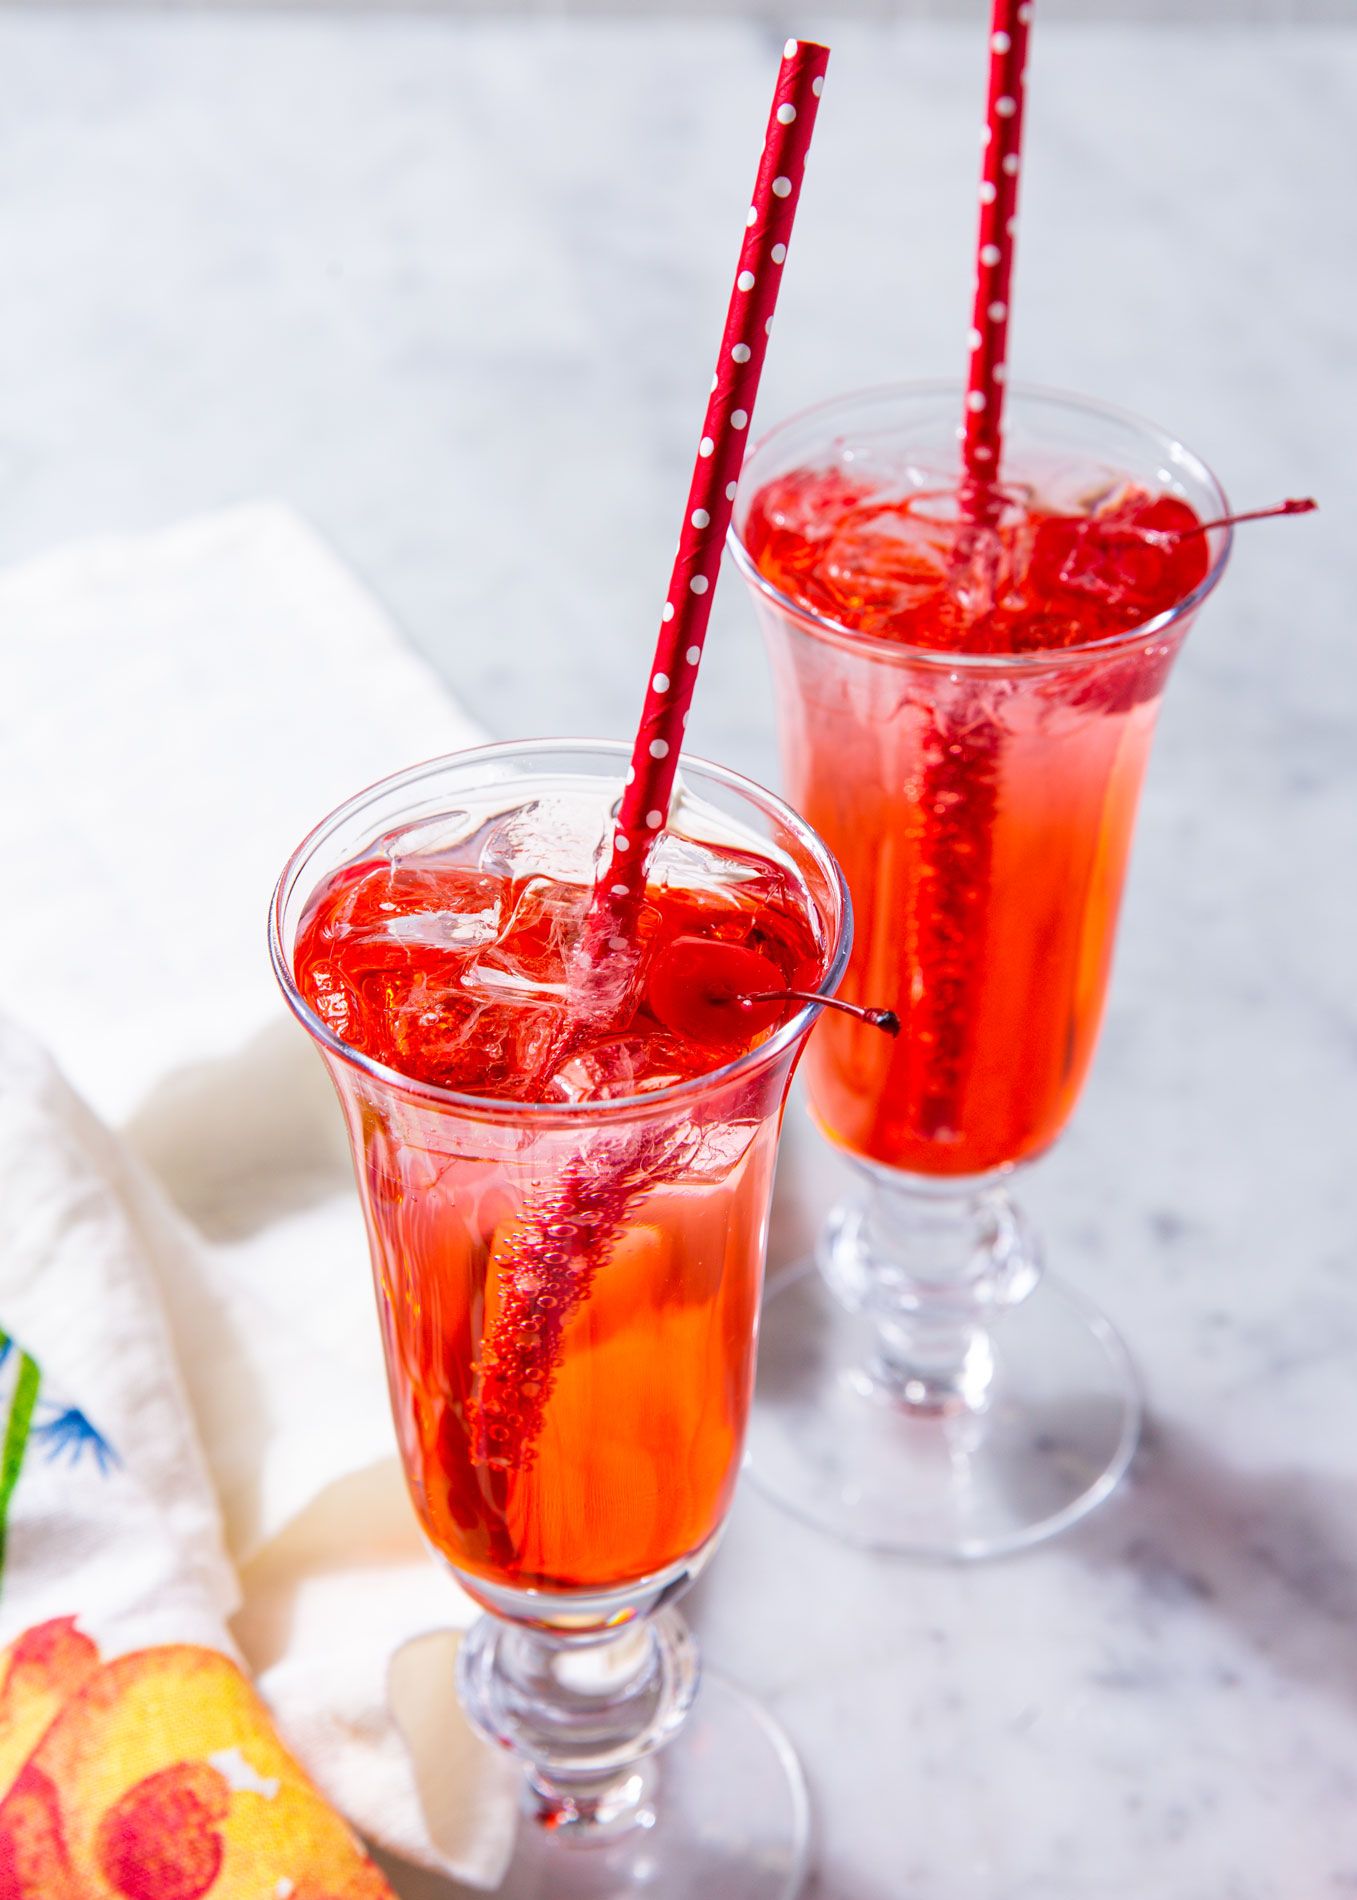 20 Easy Non Alcoholic Party Drinks Recipes For Alcohol Free Summer Drinks,Best Smoker Wallpaper